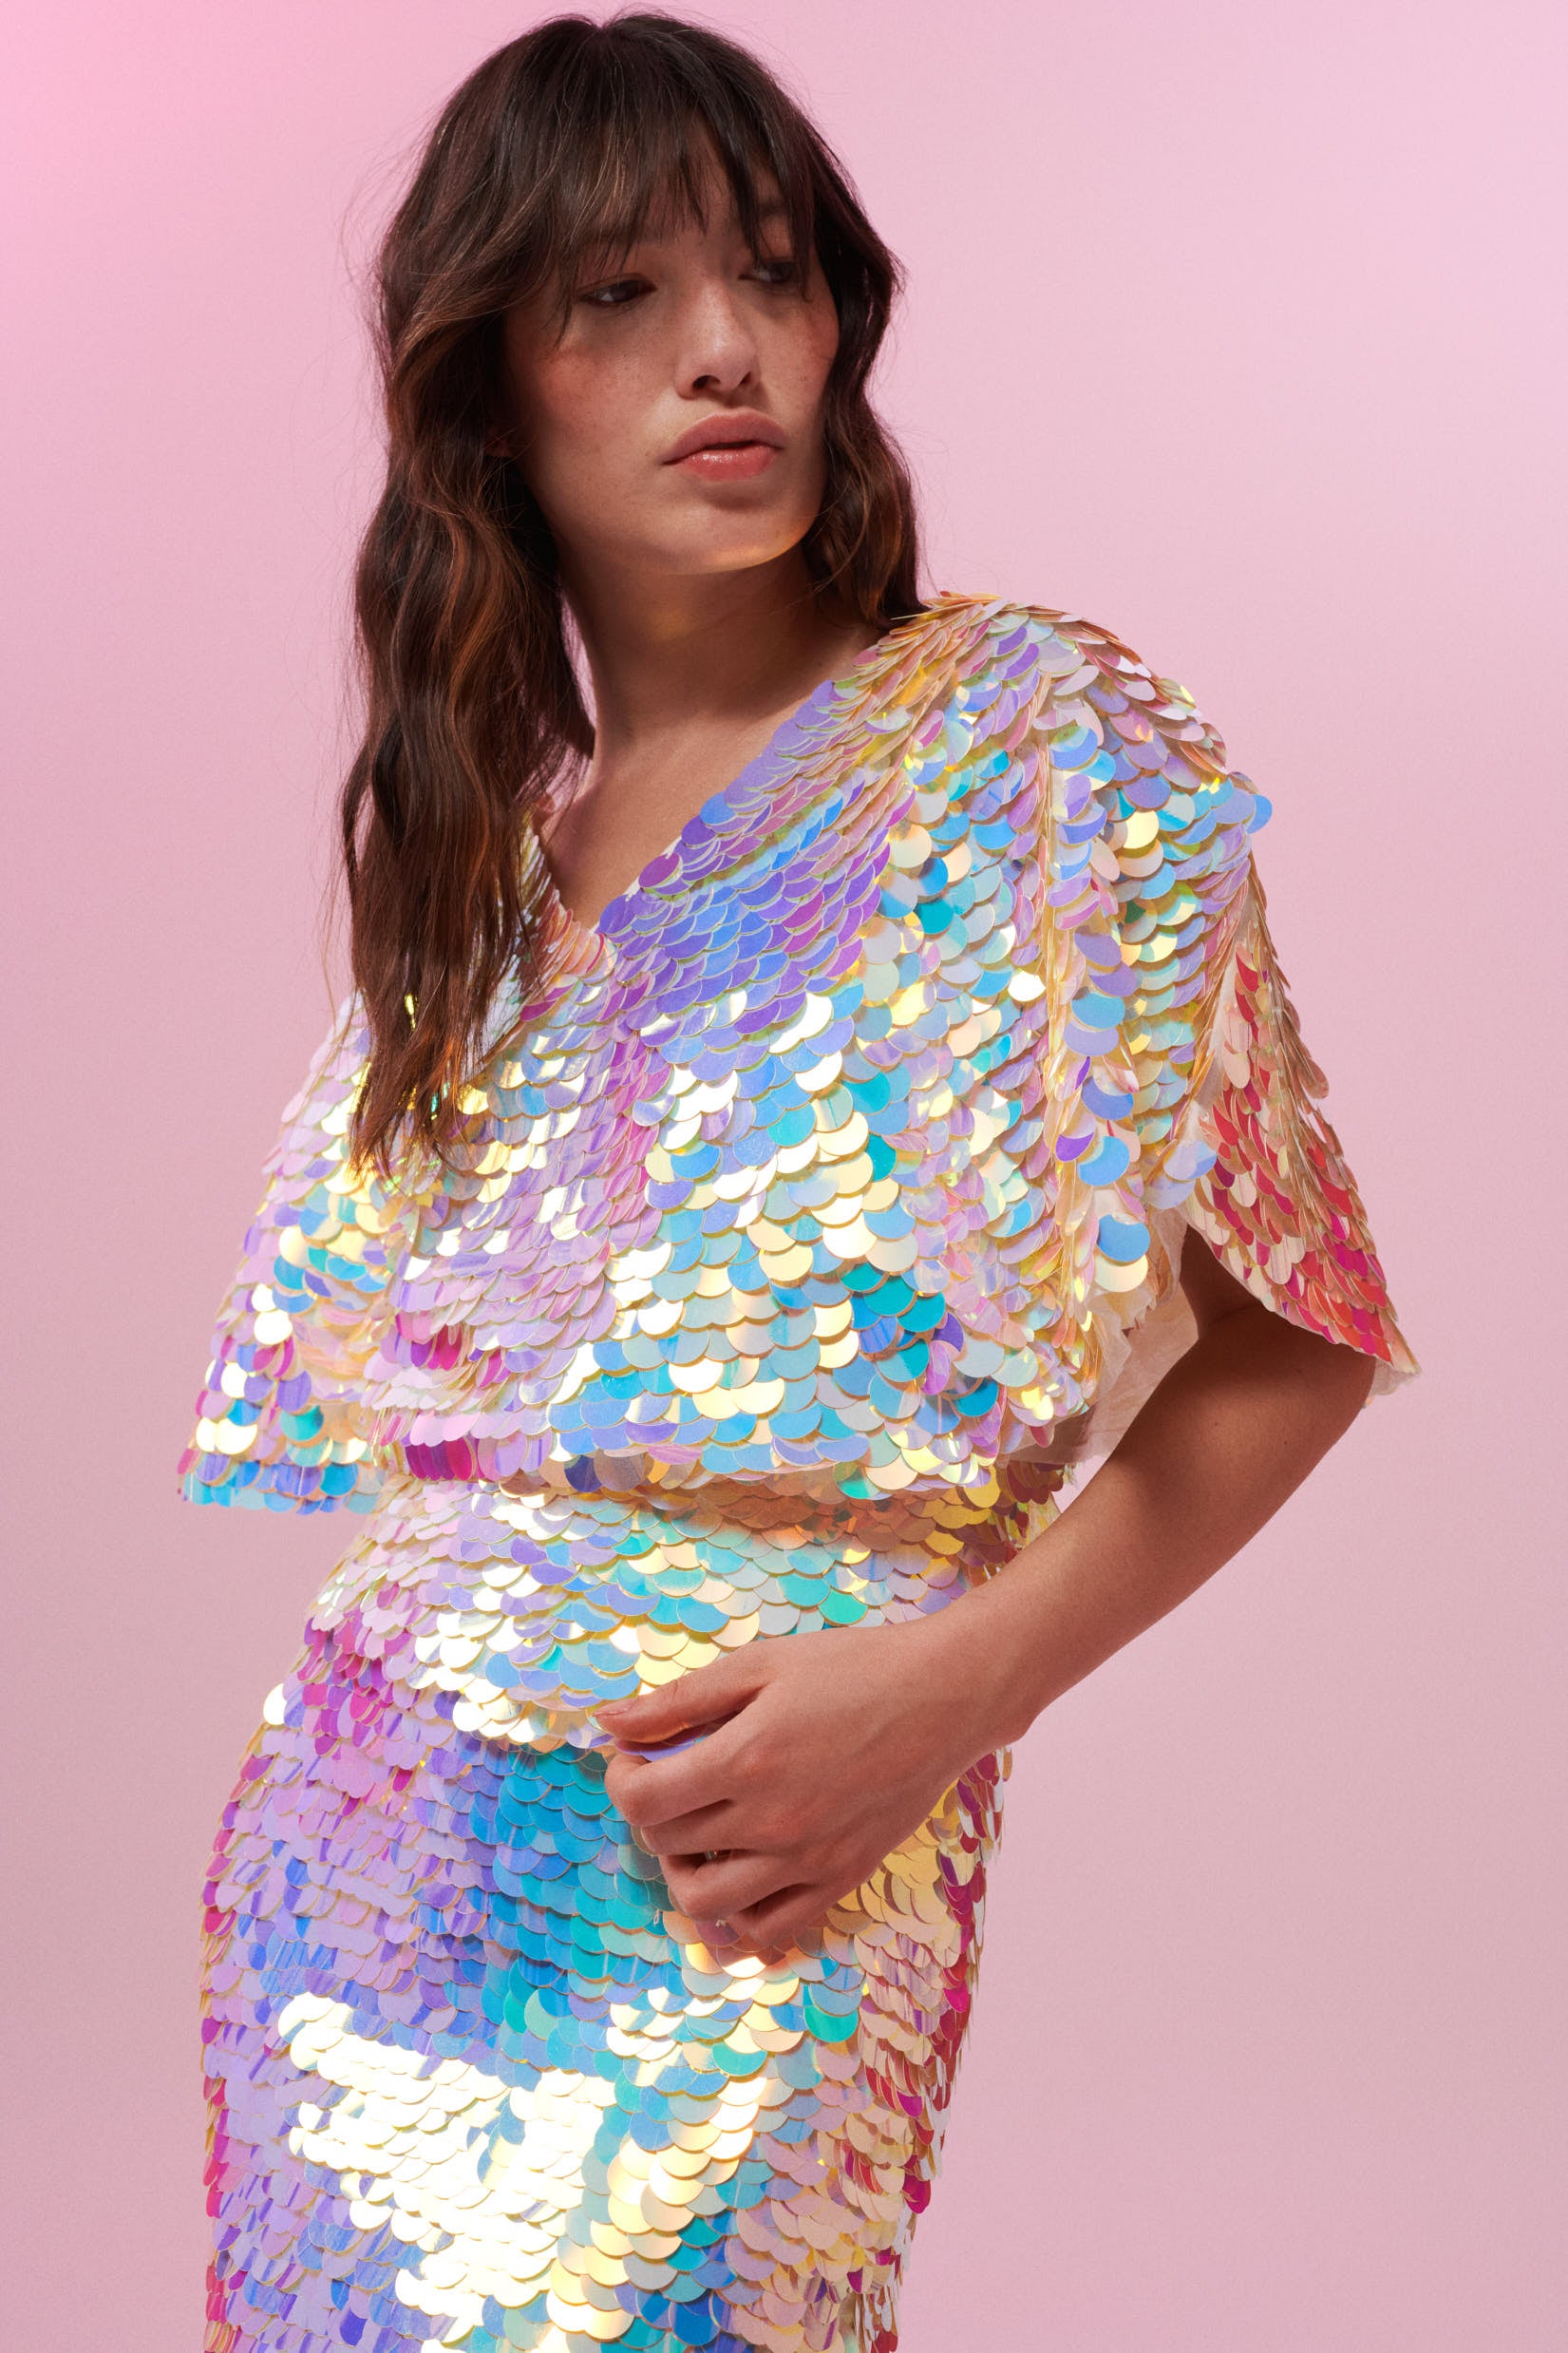 A woman facing to the side at an angle wearing an opal sequin top with large cape sleeves covered in large round holographic purple, pink, blue and white coloured Rosa Bloom sequins.